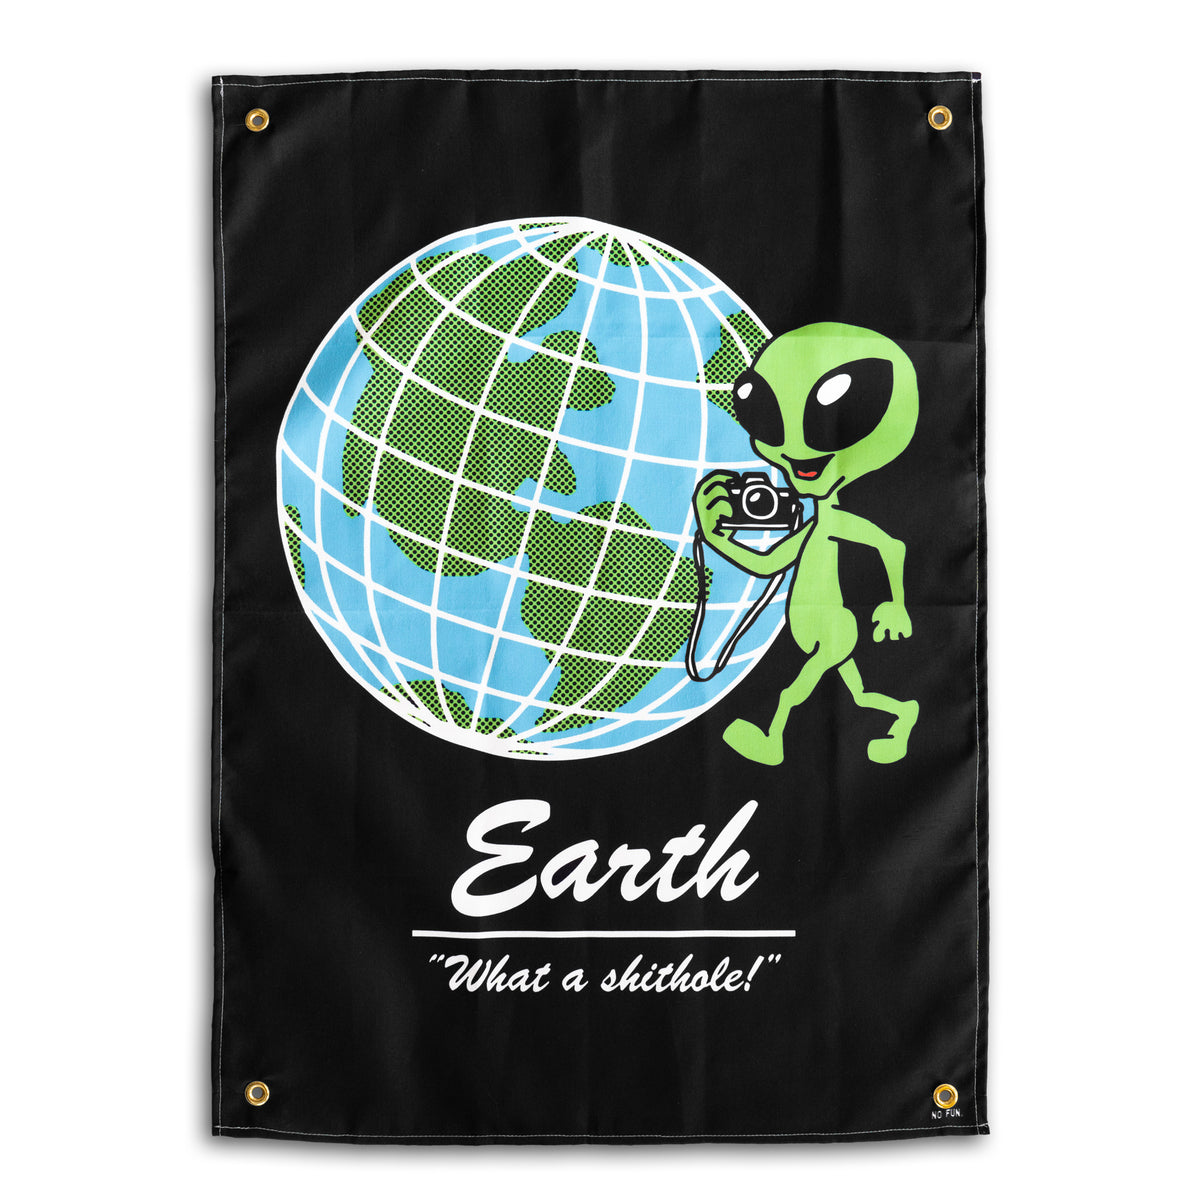 The "Tourist" Wall tapestry by No Fun®. Tapestry is black, and features a cartoon alien with a camera positioned in front of a globe.  The phrase "Earth 'What a shithole!'" is underneath the globe.  There is 1 brass grommet in each corner of the tapestry.